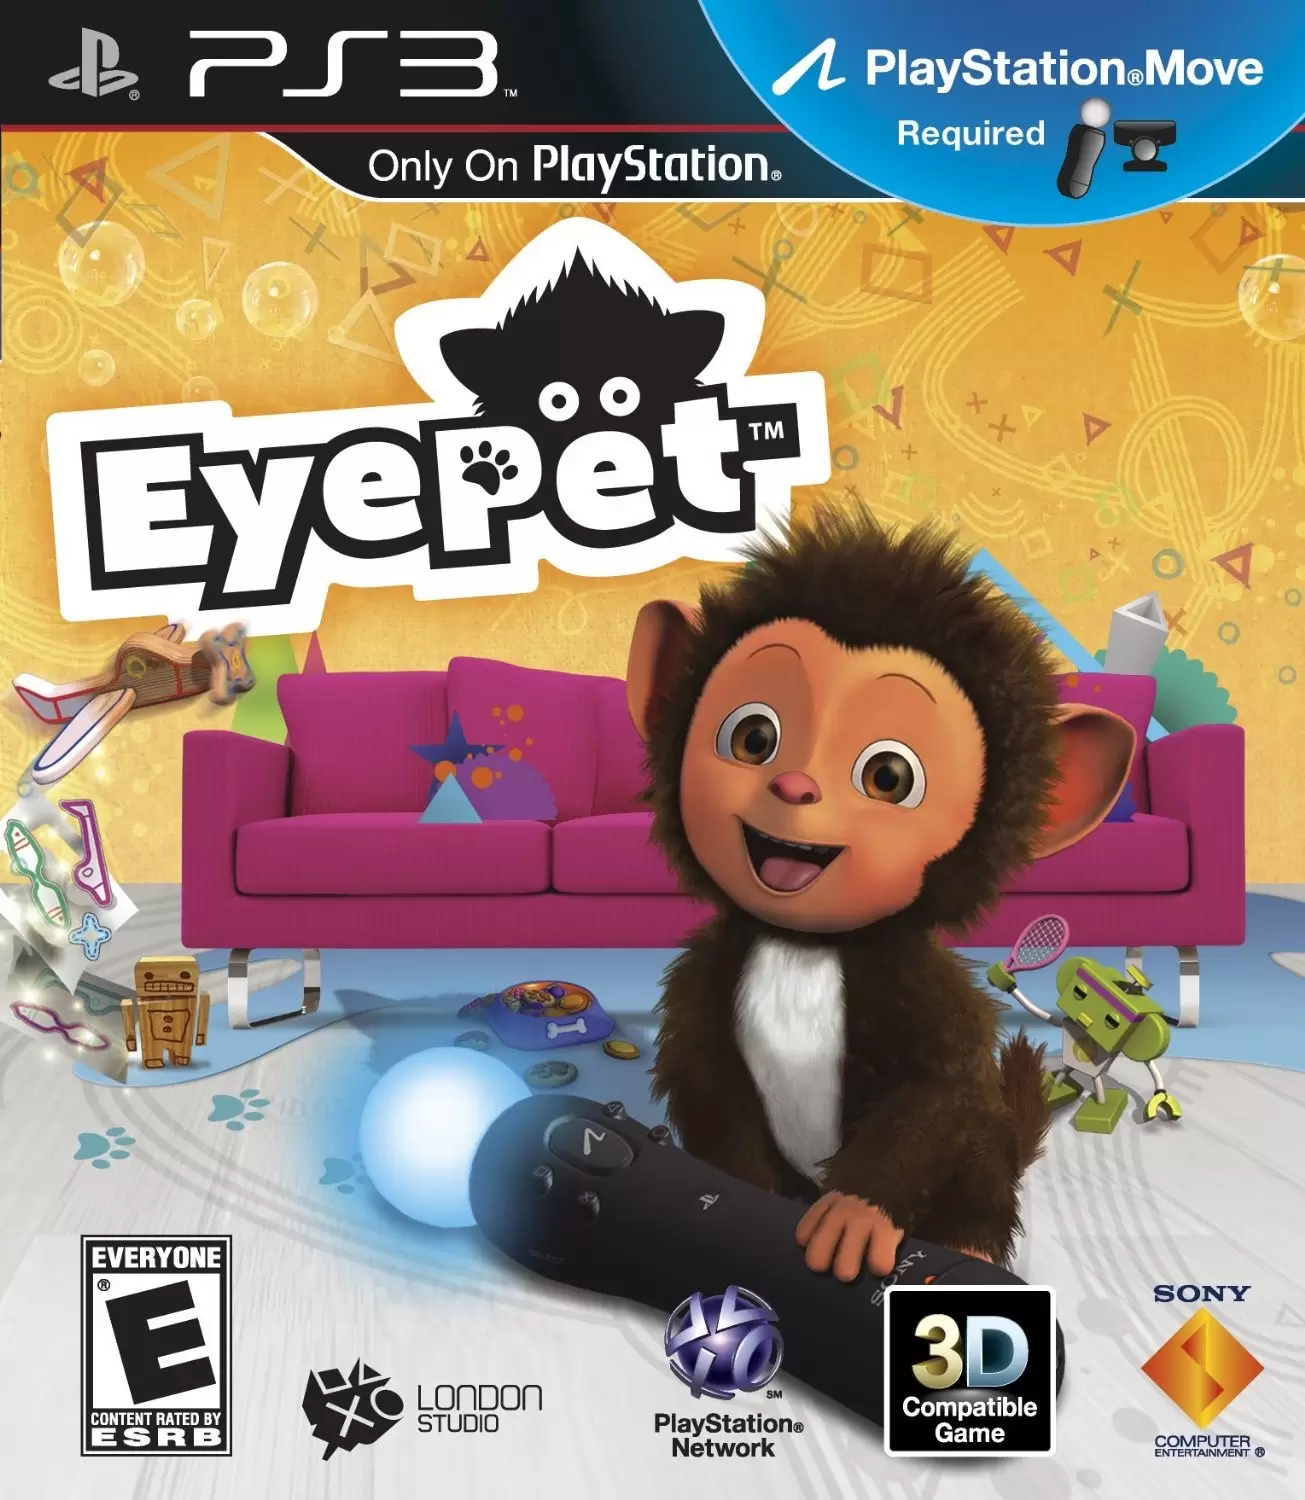 PS3 Games - EyePet